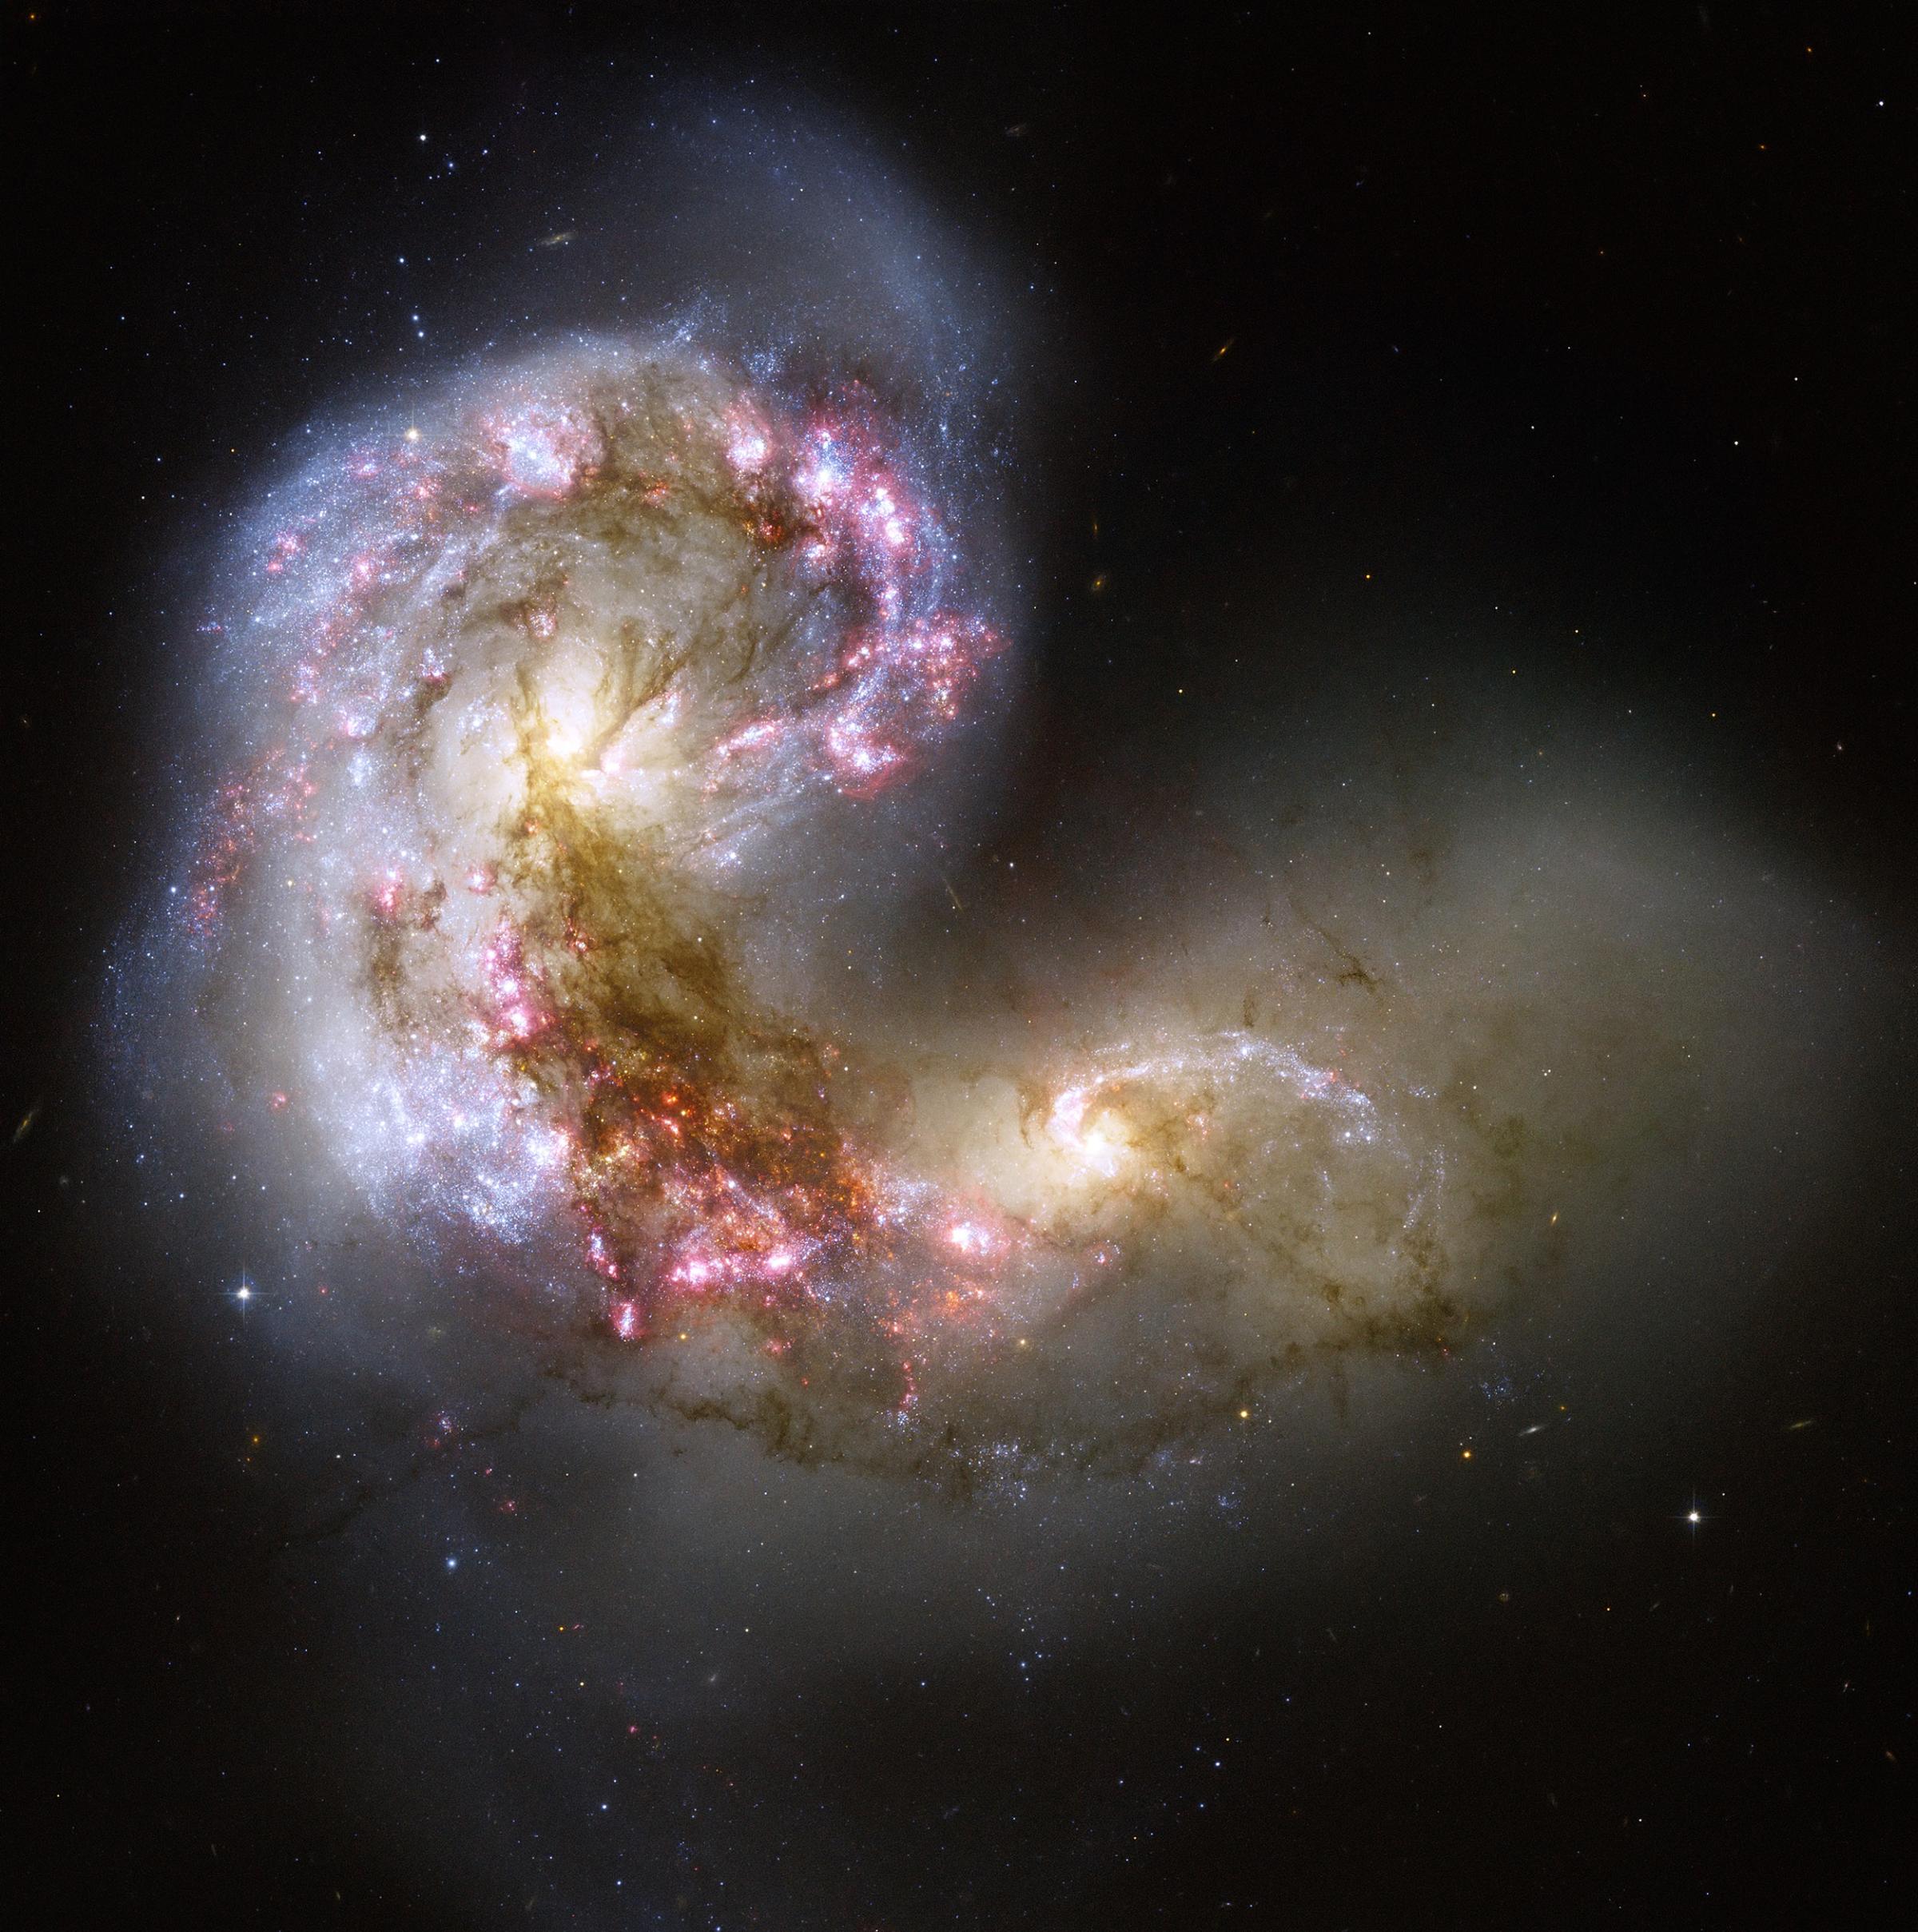 This Hubble image taken in Aug. 2012, of the Antennae galaxies is the sharpest yet of this merging pair of galaxies. As the two galaxies smash together, billions of stars are born, mostly in groups and clusters of stars. The brightest and most compact of these are called super star clusters.